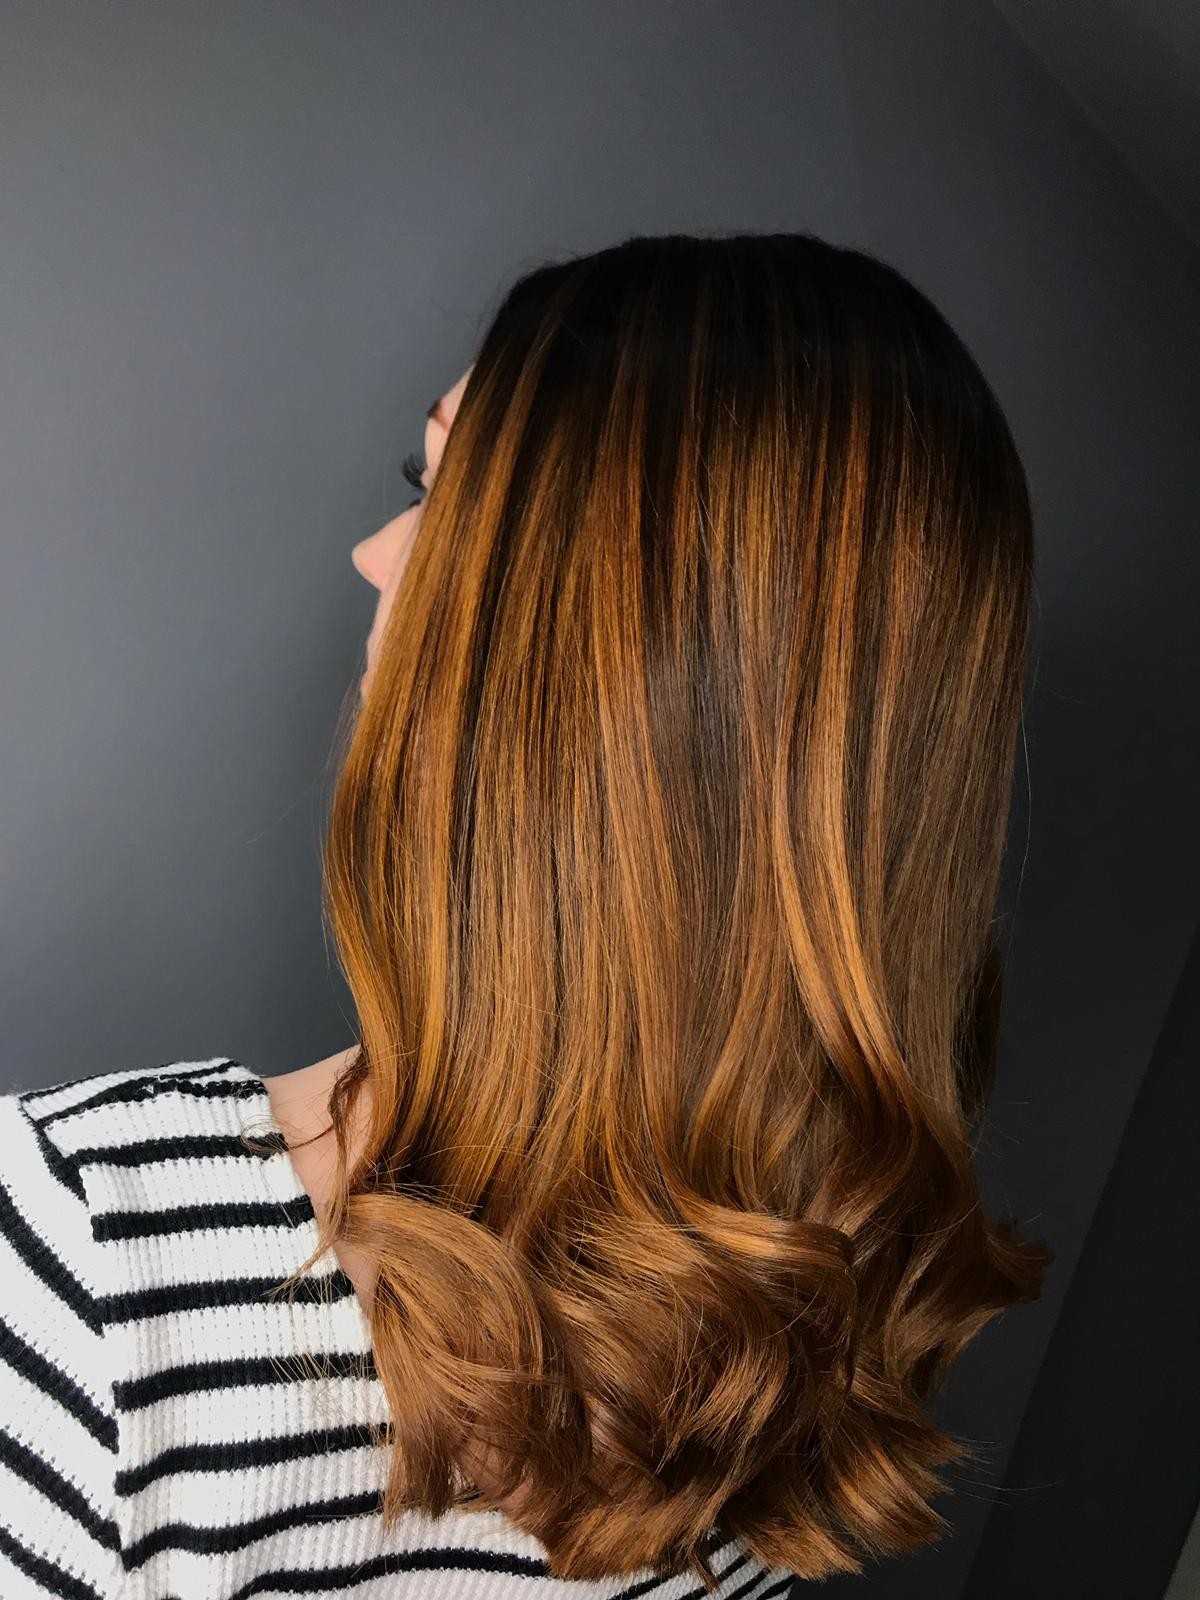 Enter for your chance to win a cut and blow-dry with the stylist of your choice.